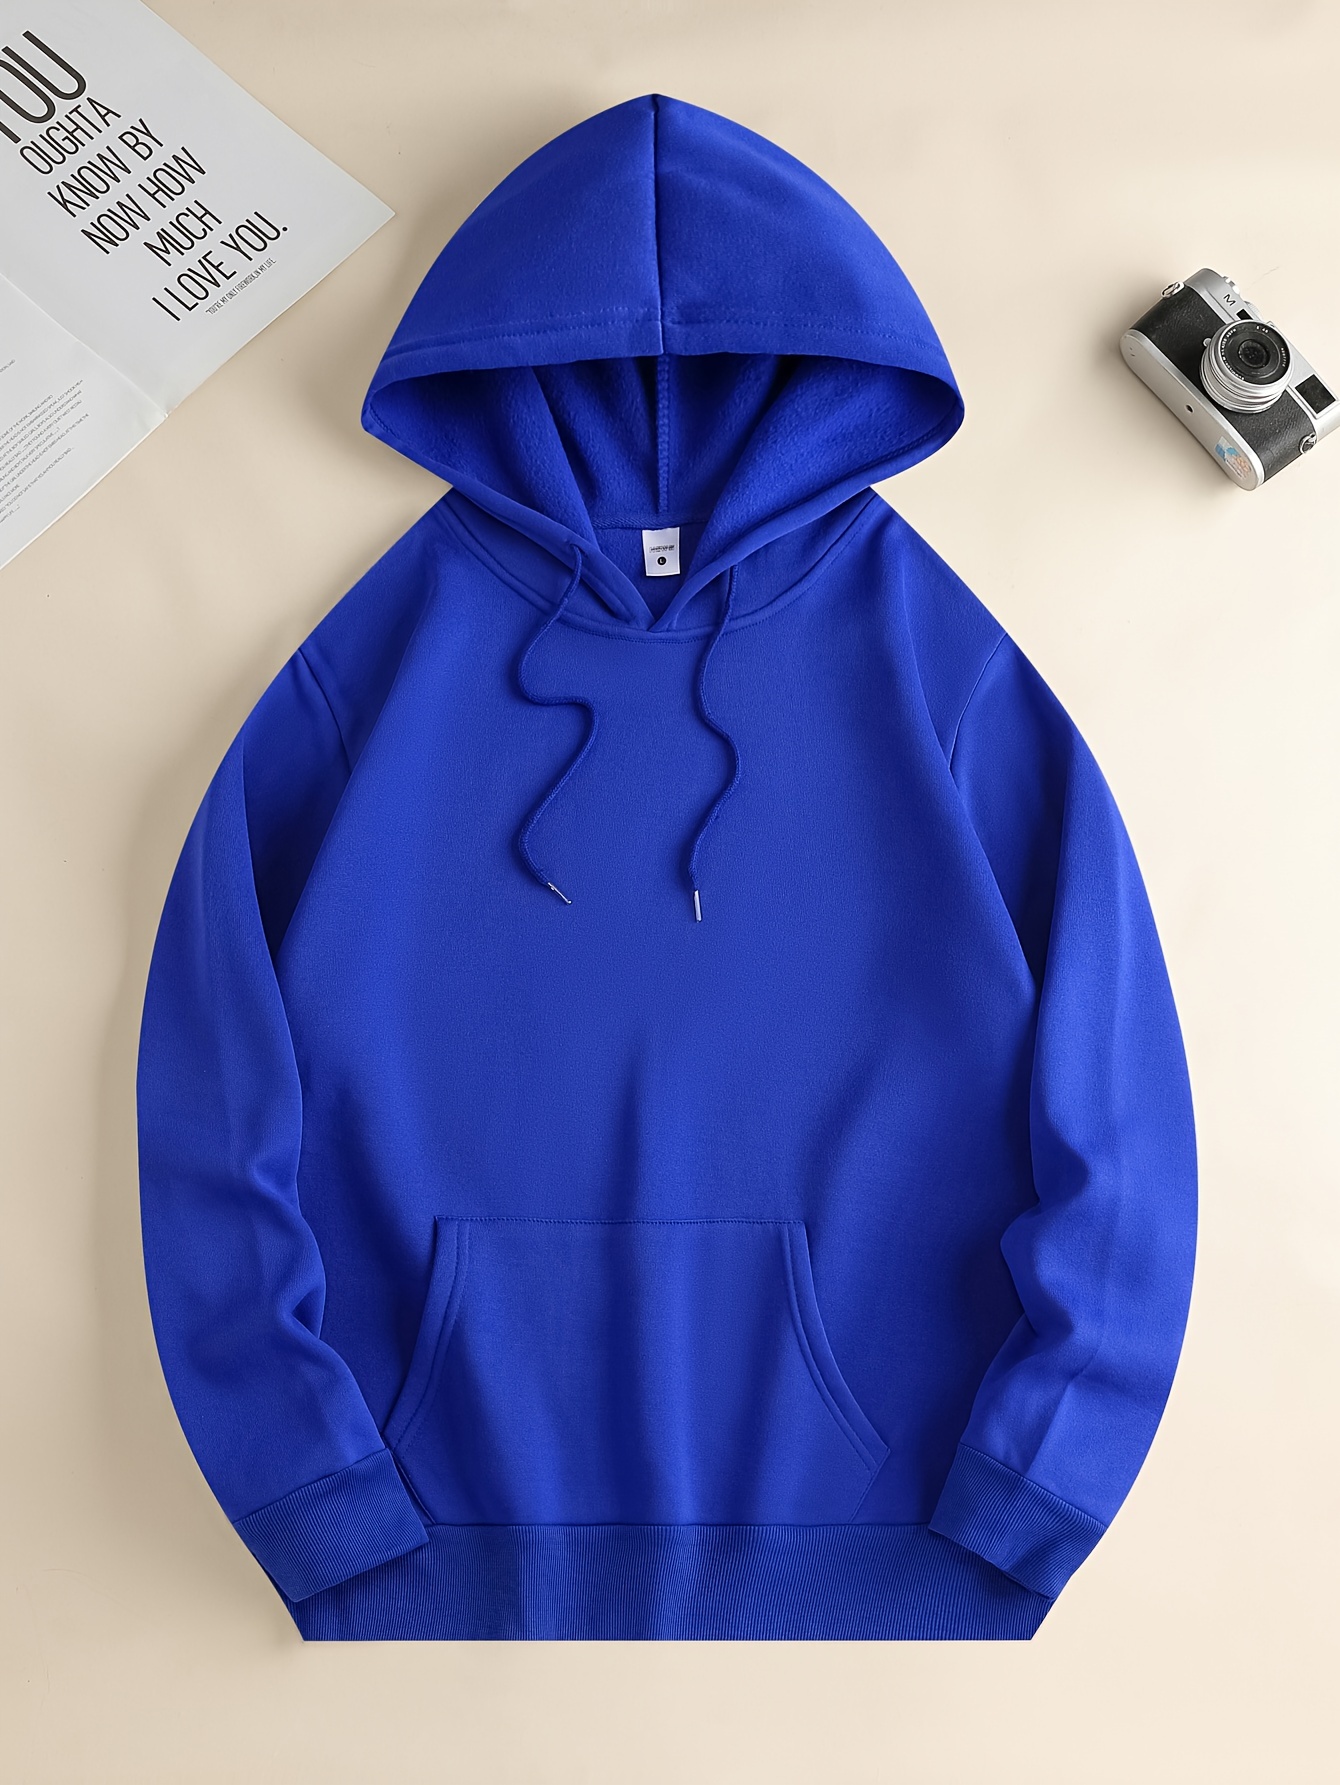 you are amazing print mens pullover round neck hoodies with kangaroo pocket long sleeve hooded sweatshirt loose casual top for autumn winter mens clothing as gifts details 26